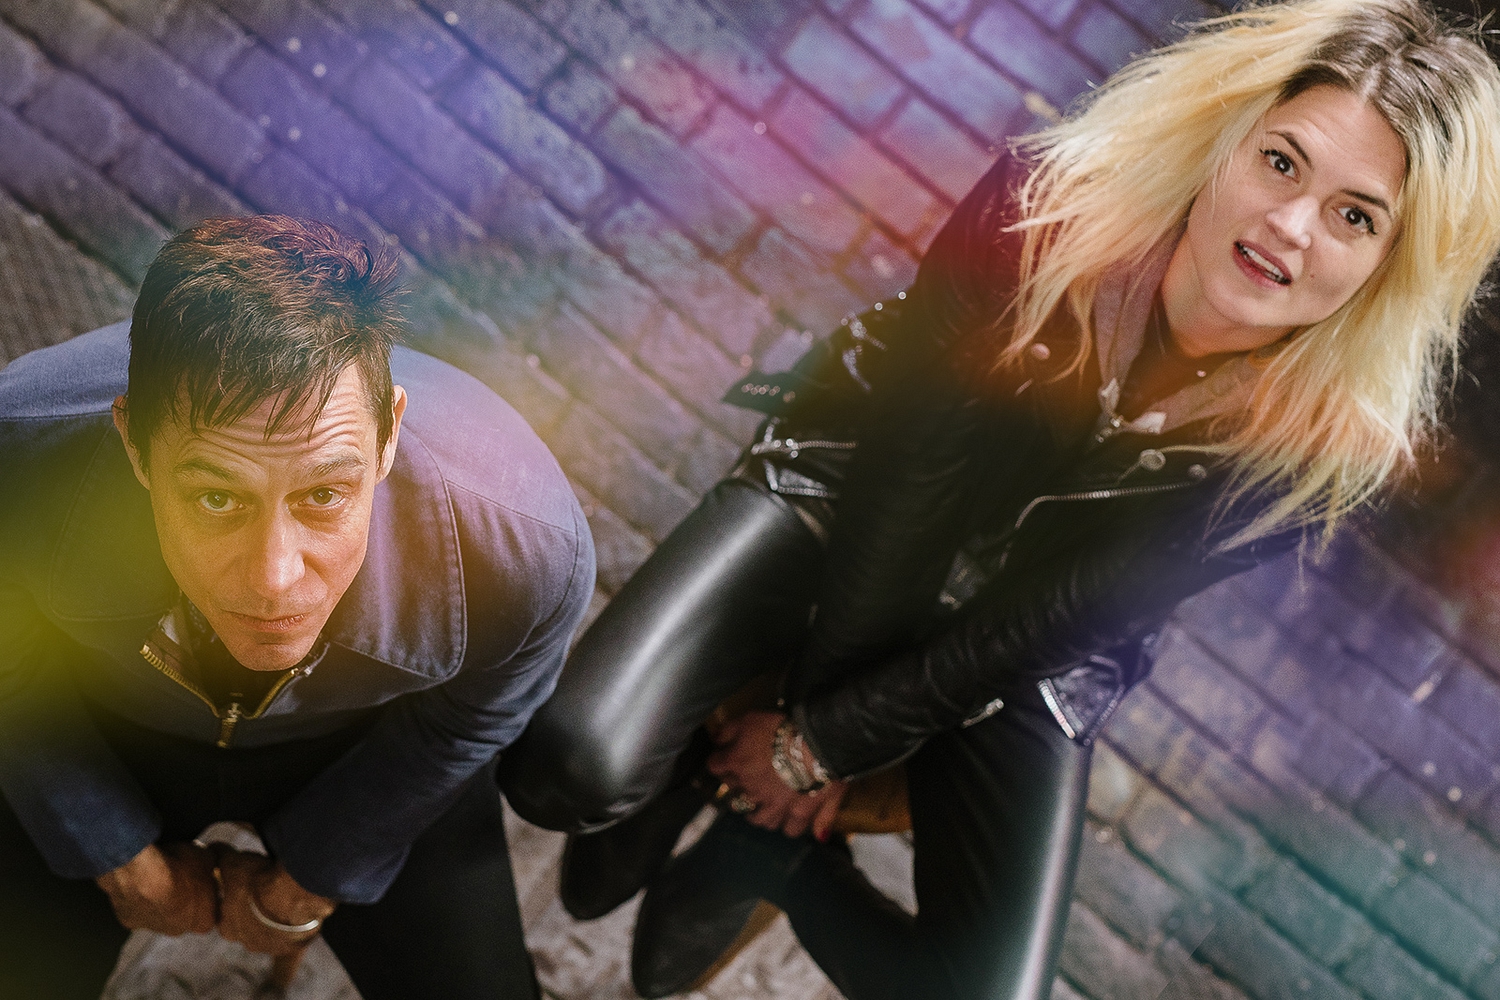 The Kills: "This feeling of completeness - with art, that's a big thing"